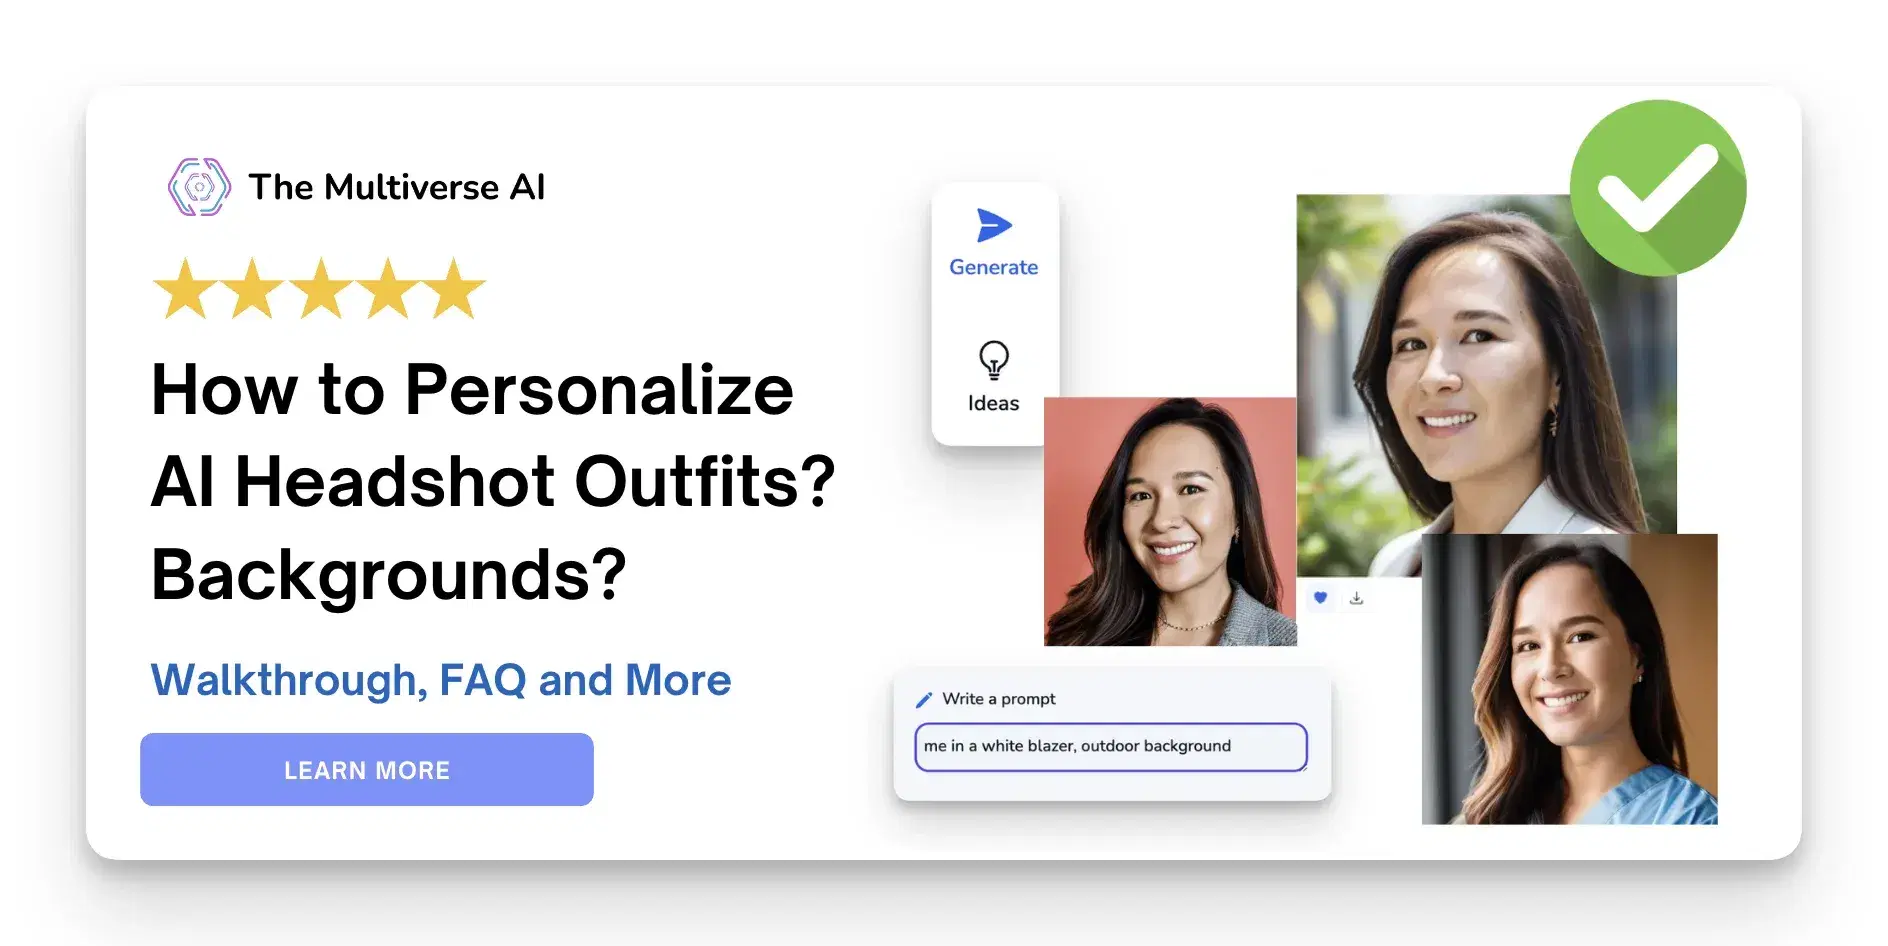 How to personalize AI headshot outfits or backgrounds to get professional photos for doctors, lawyers, real estate and more